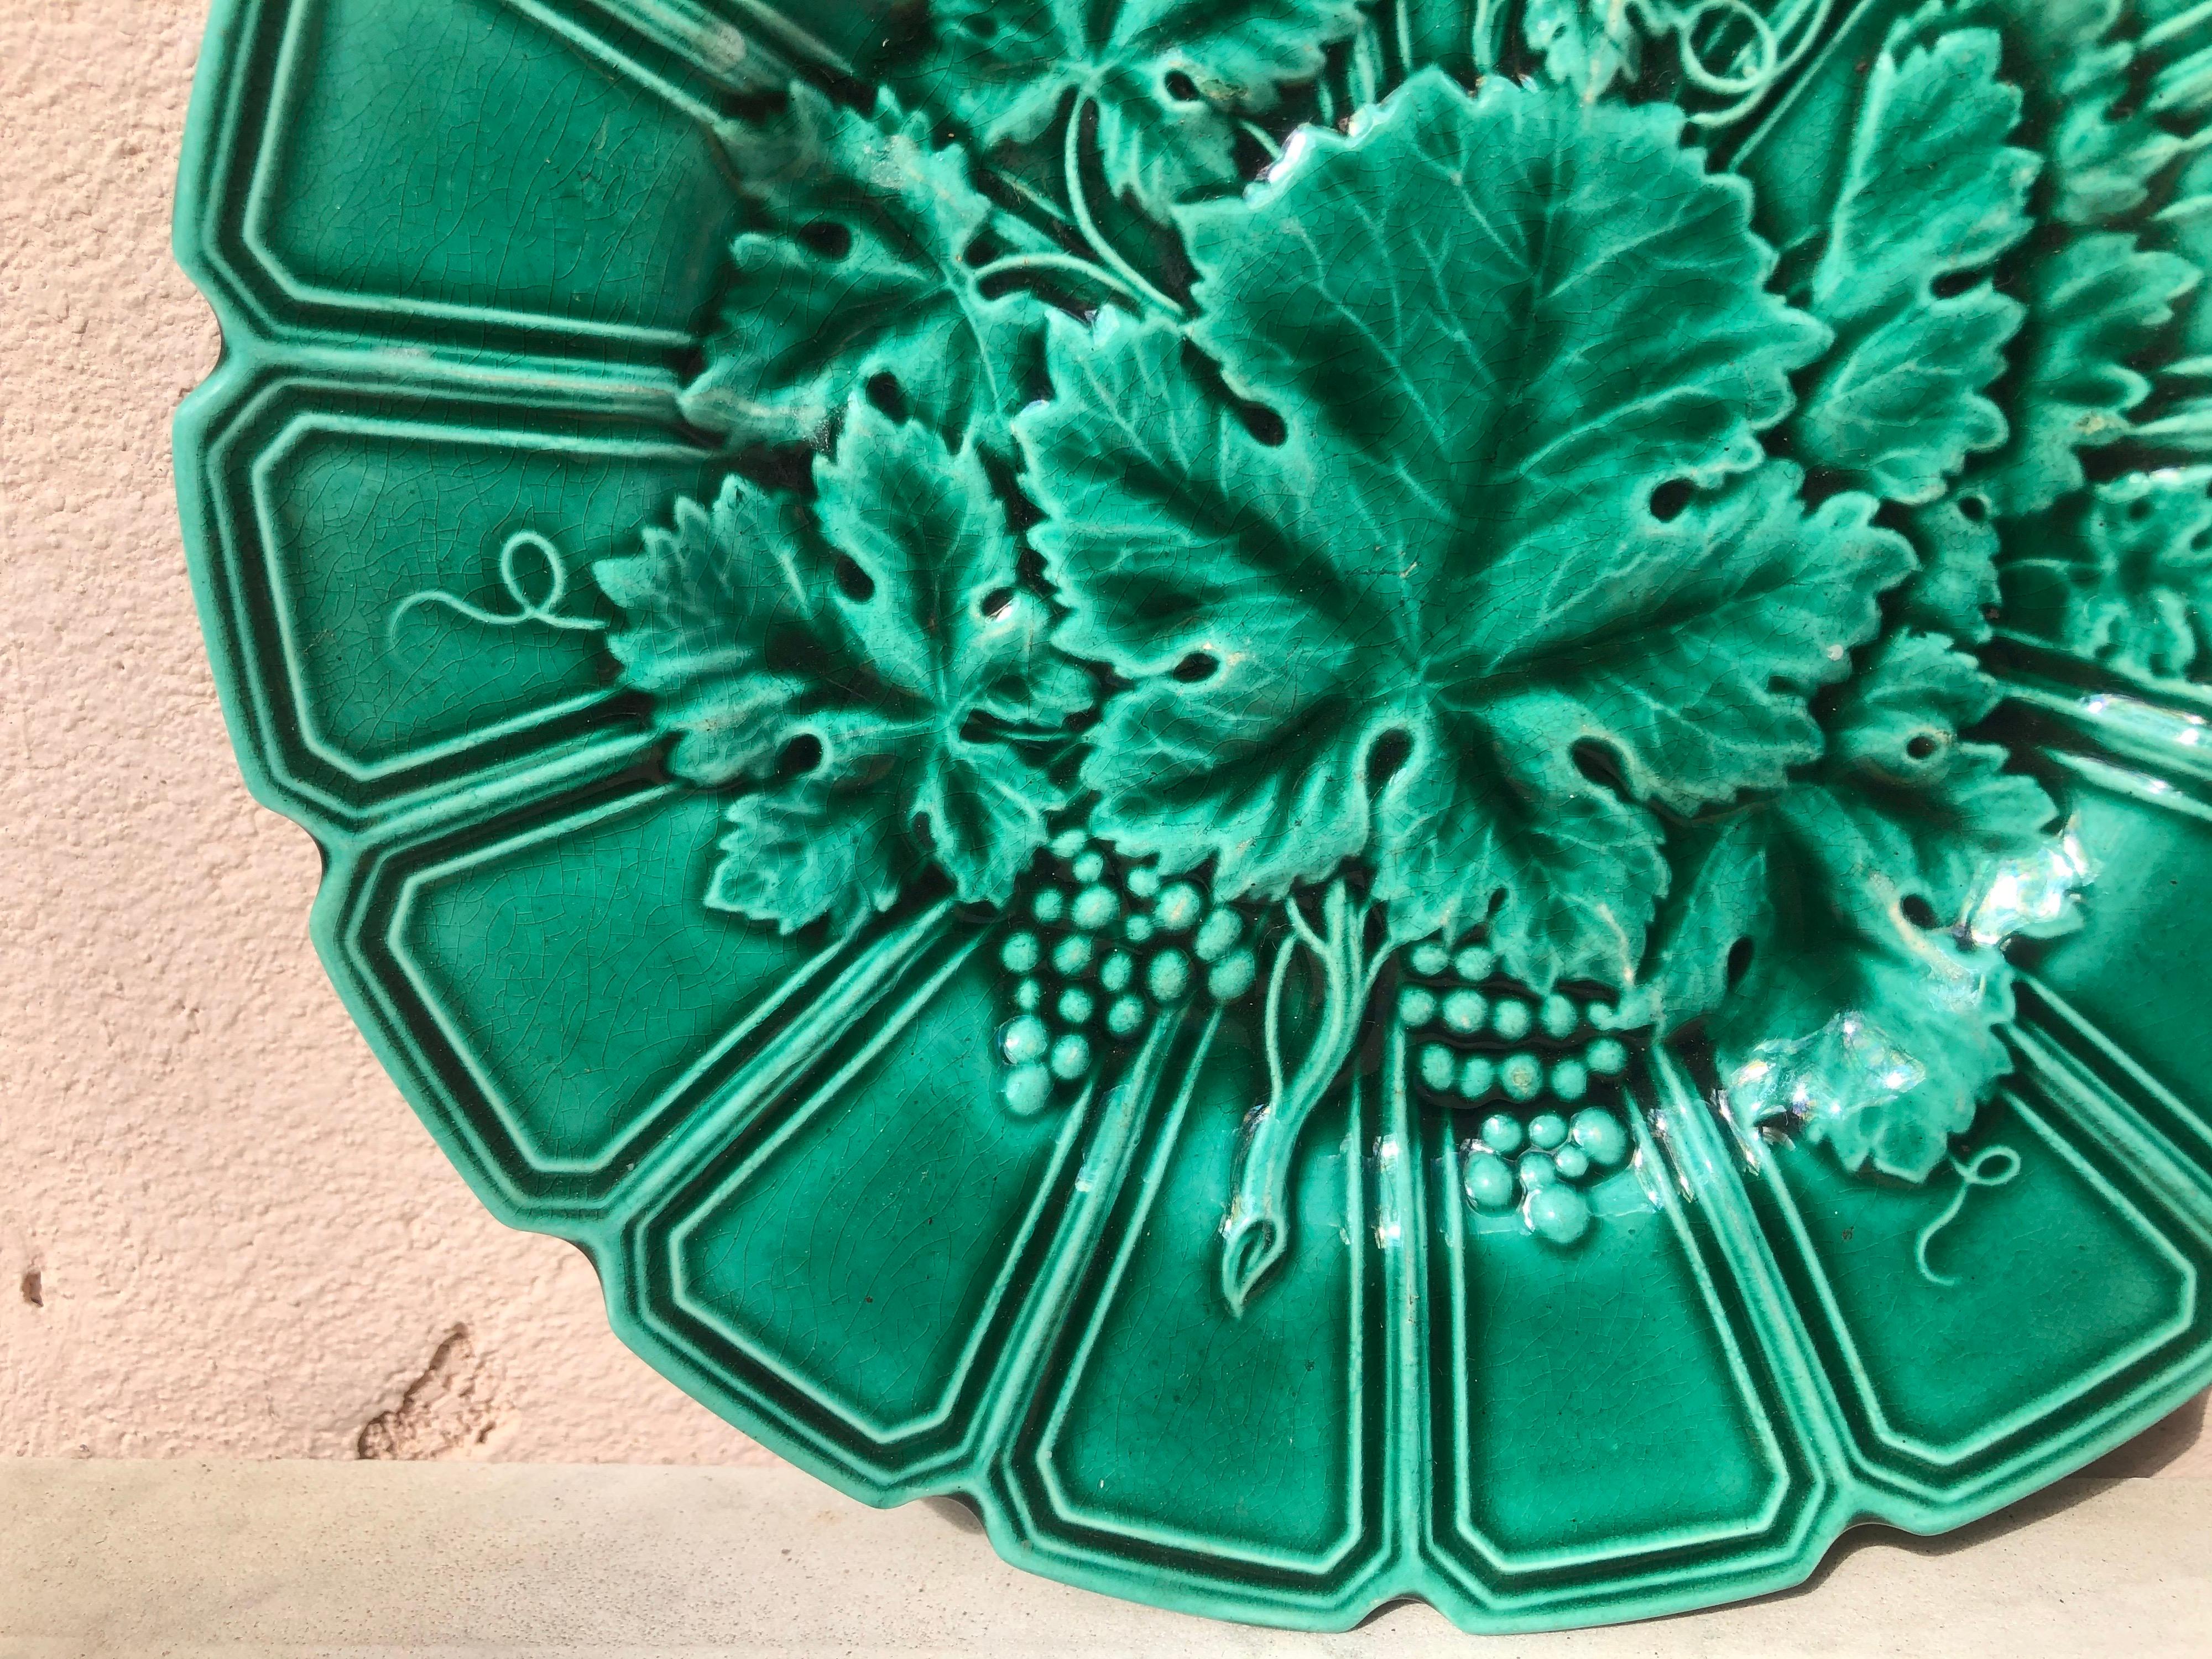 19th century French green Majolica plate with vine leaves signed Sarreguemines.